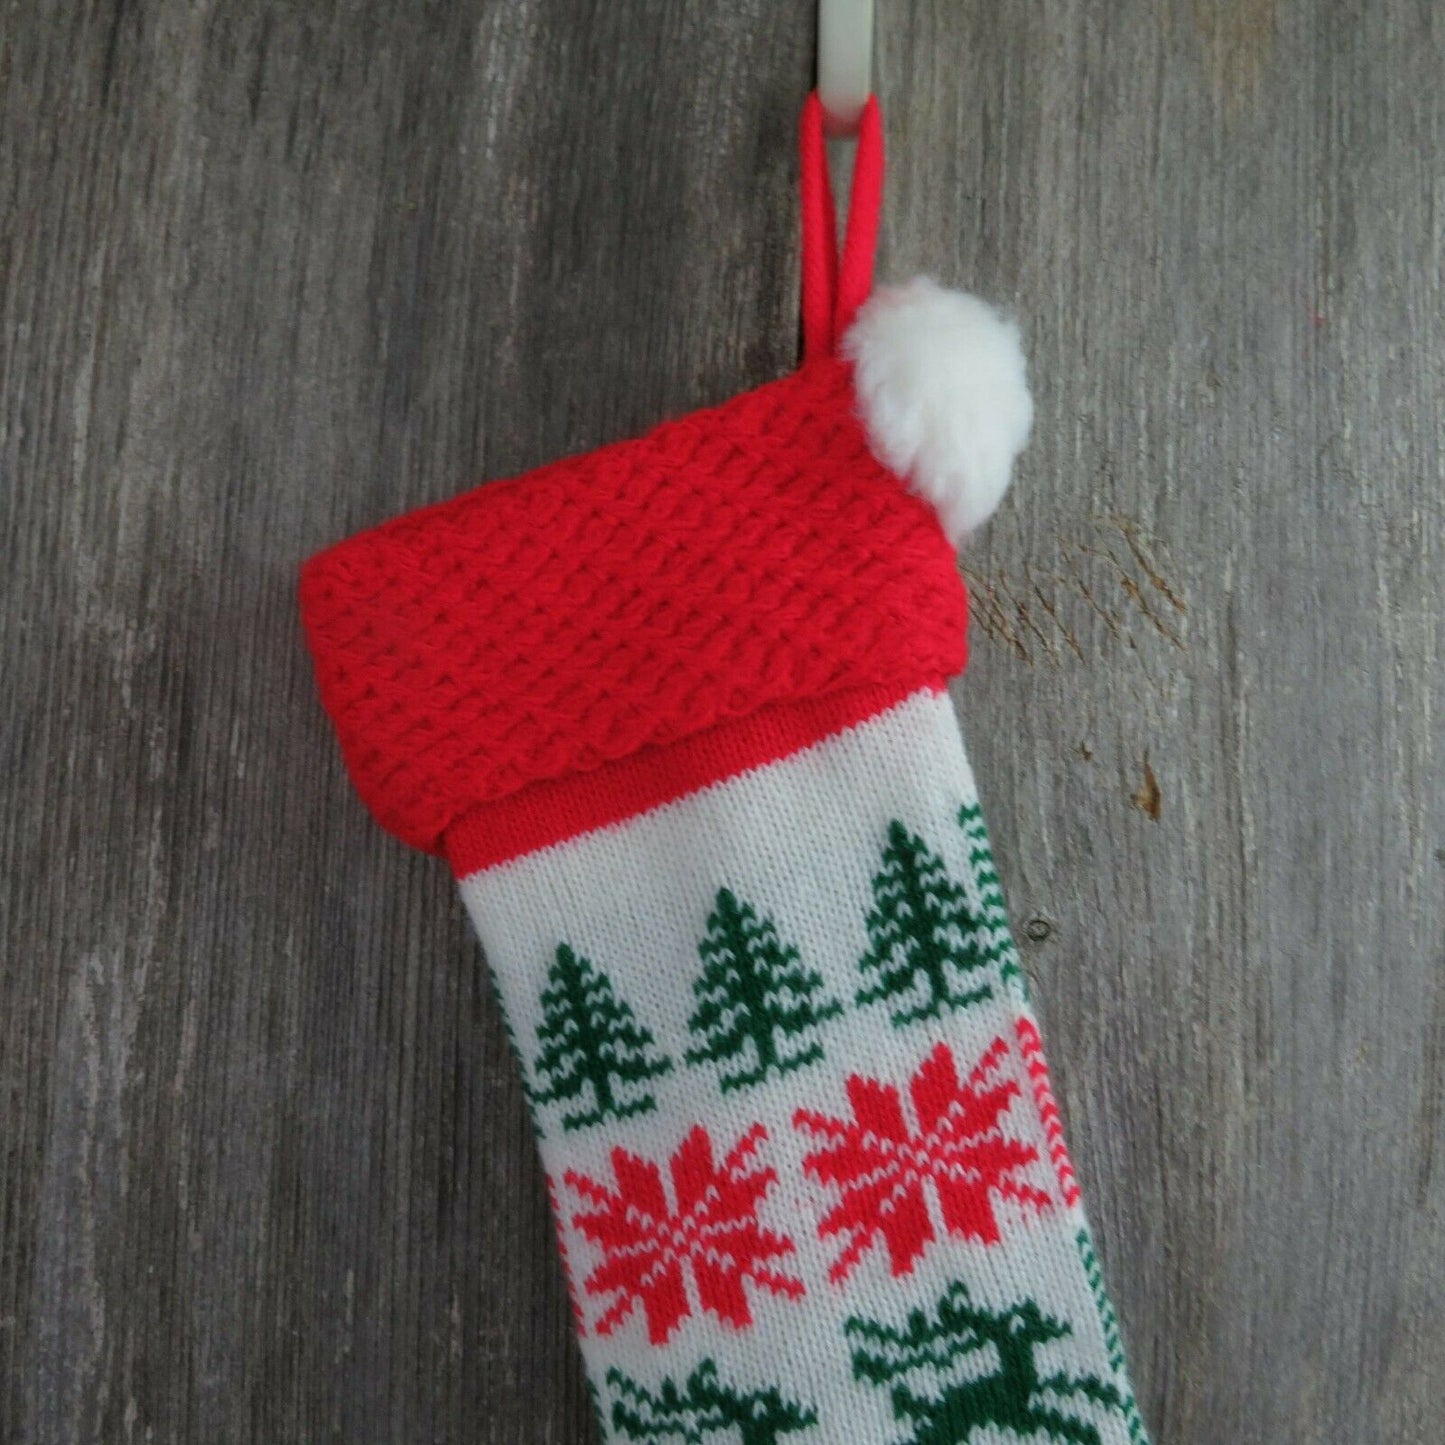 Vintage Stocking Knitted Christmas Knit Tree Snowflake Reindeer Green Red White - At Grandma's Table